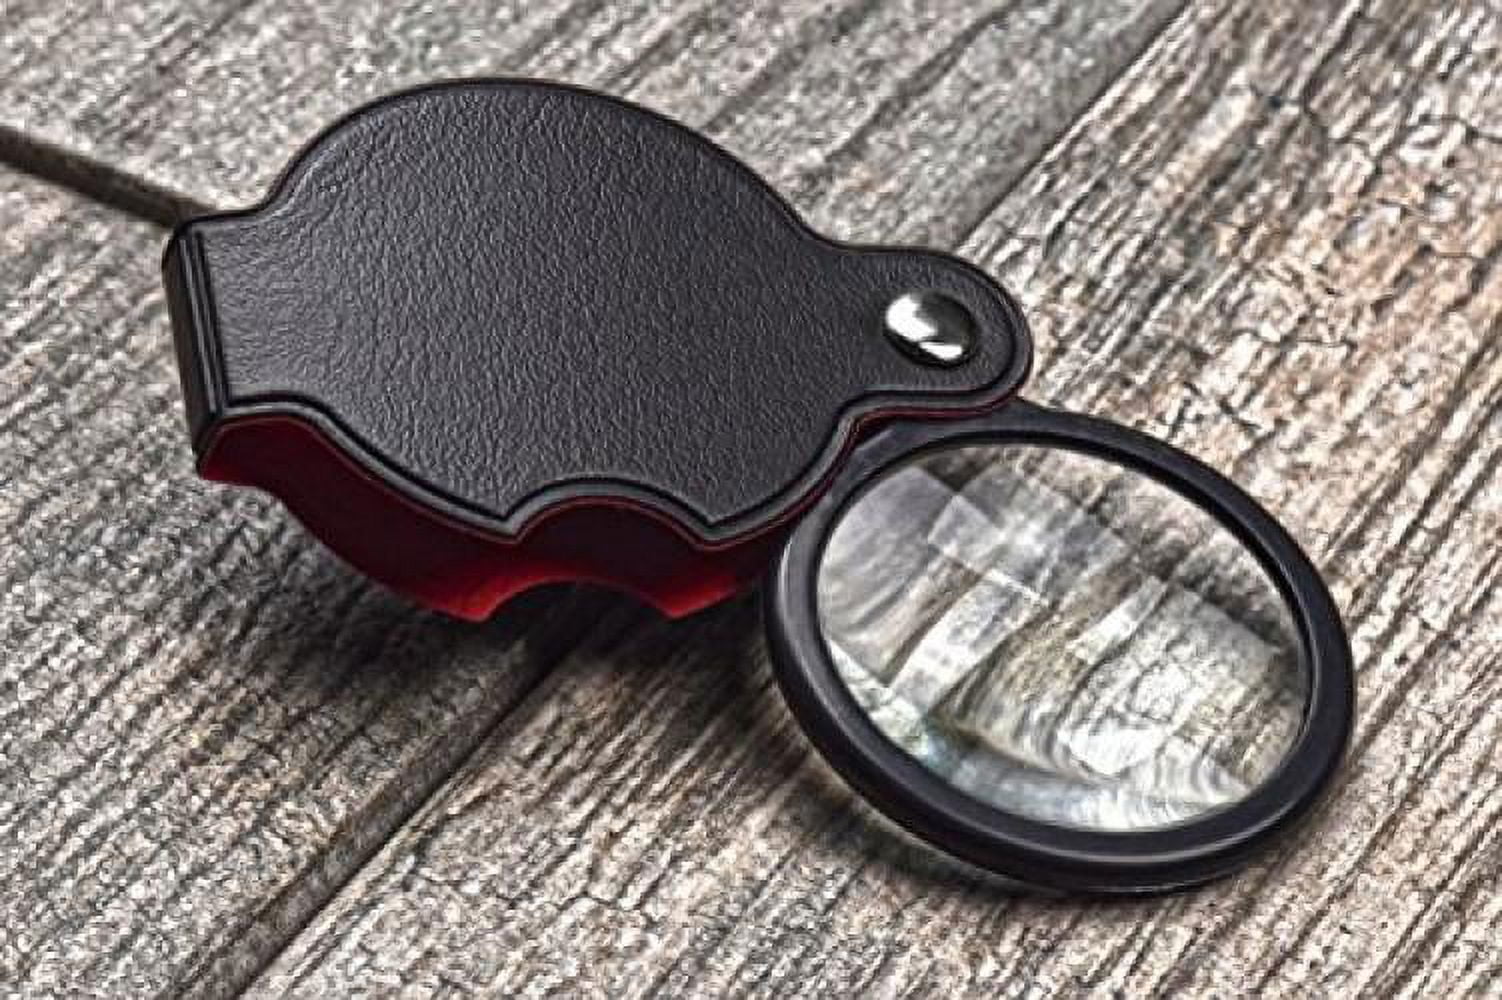 Portable Magnifying Glasses for Watch Football Match Outdoor Fishing Hiking